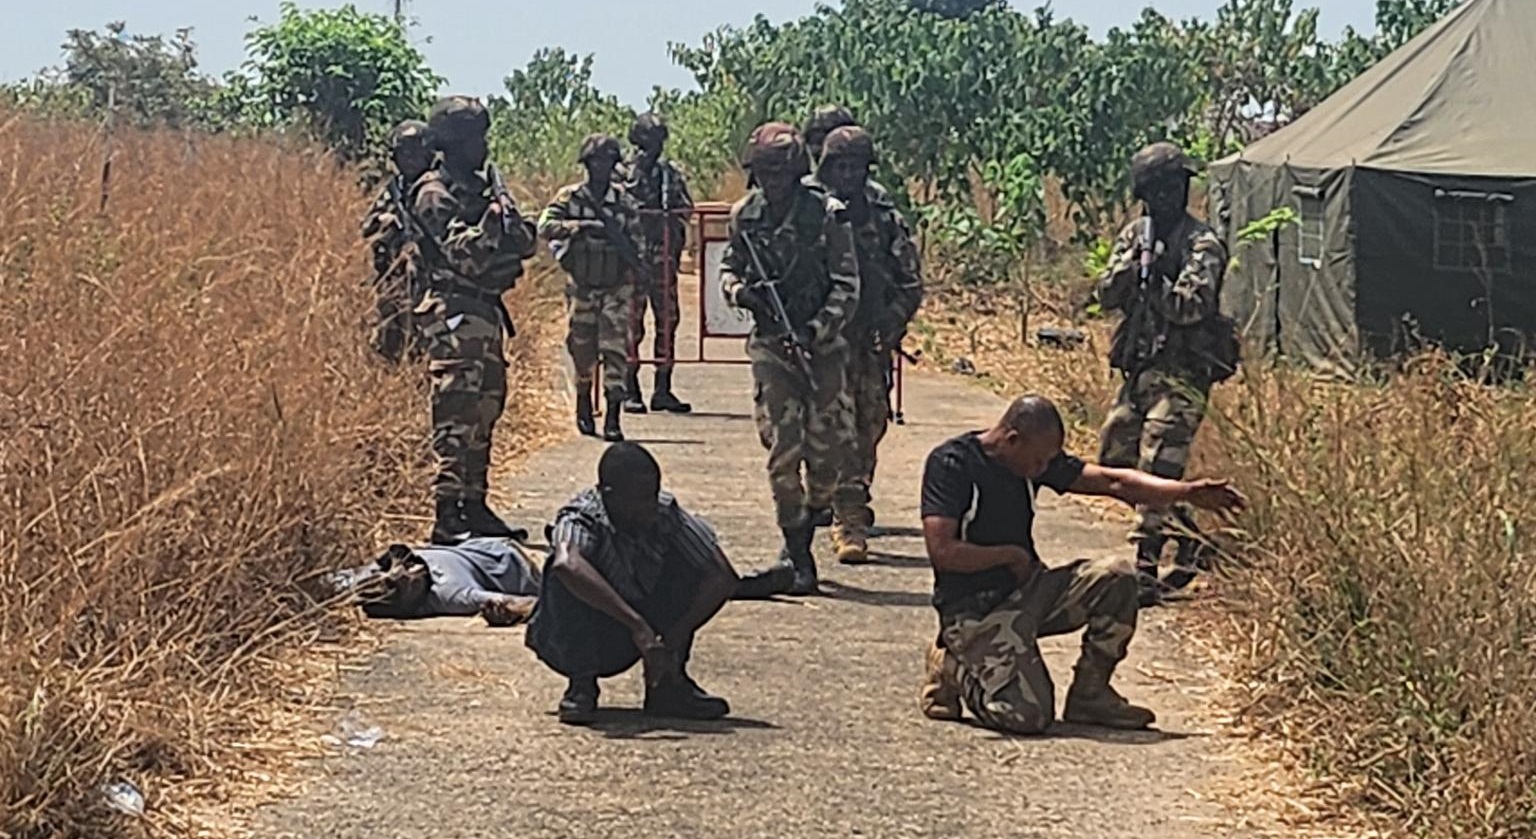 US Army Trains 80 Sierra Leone Soldiers on Critical Site And Asset Security